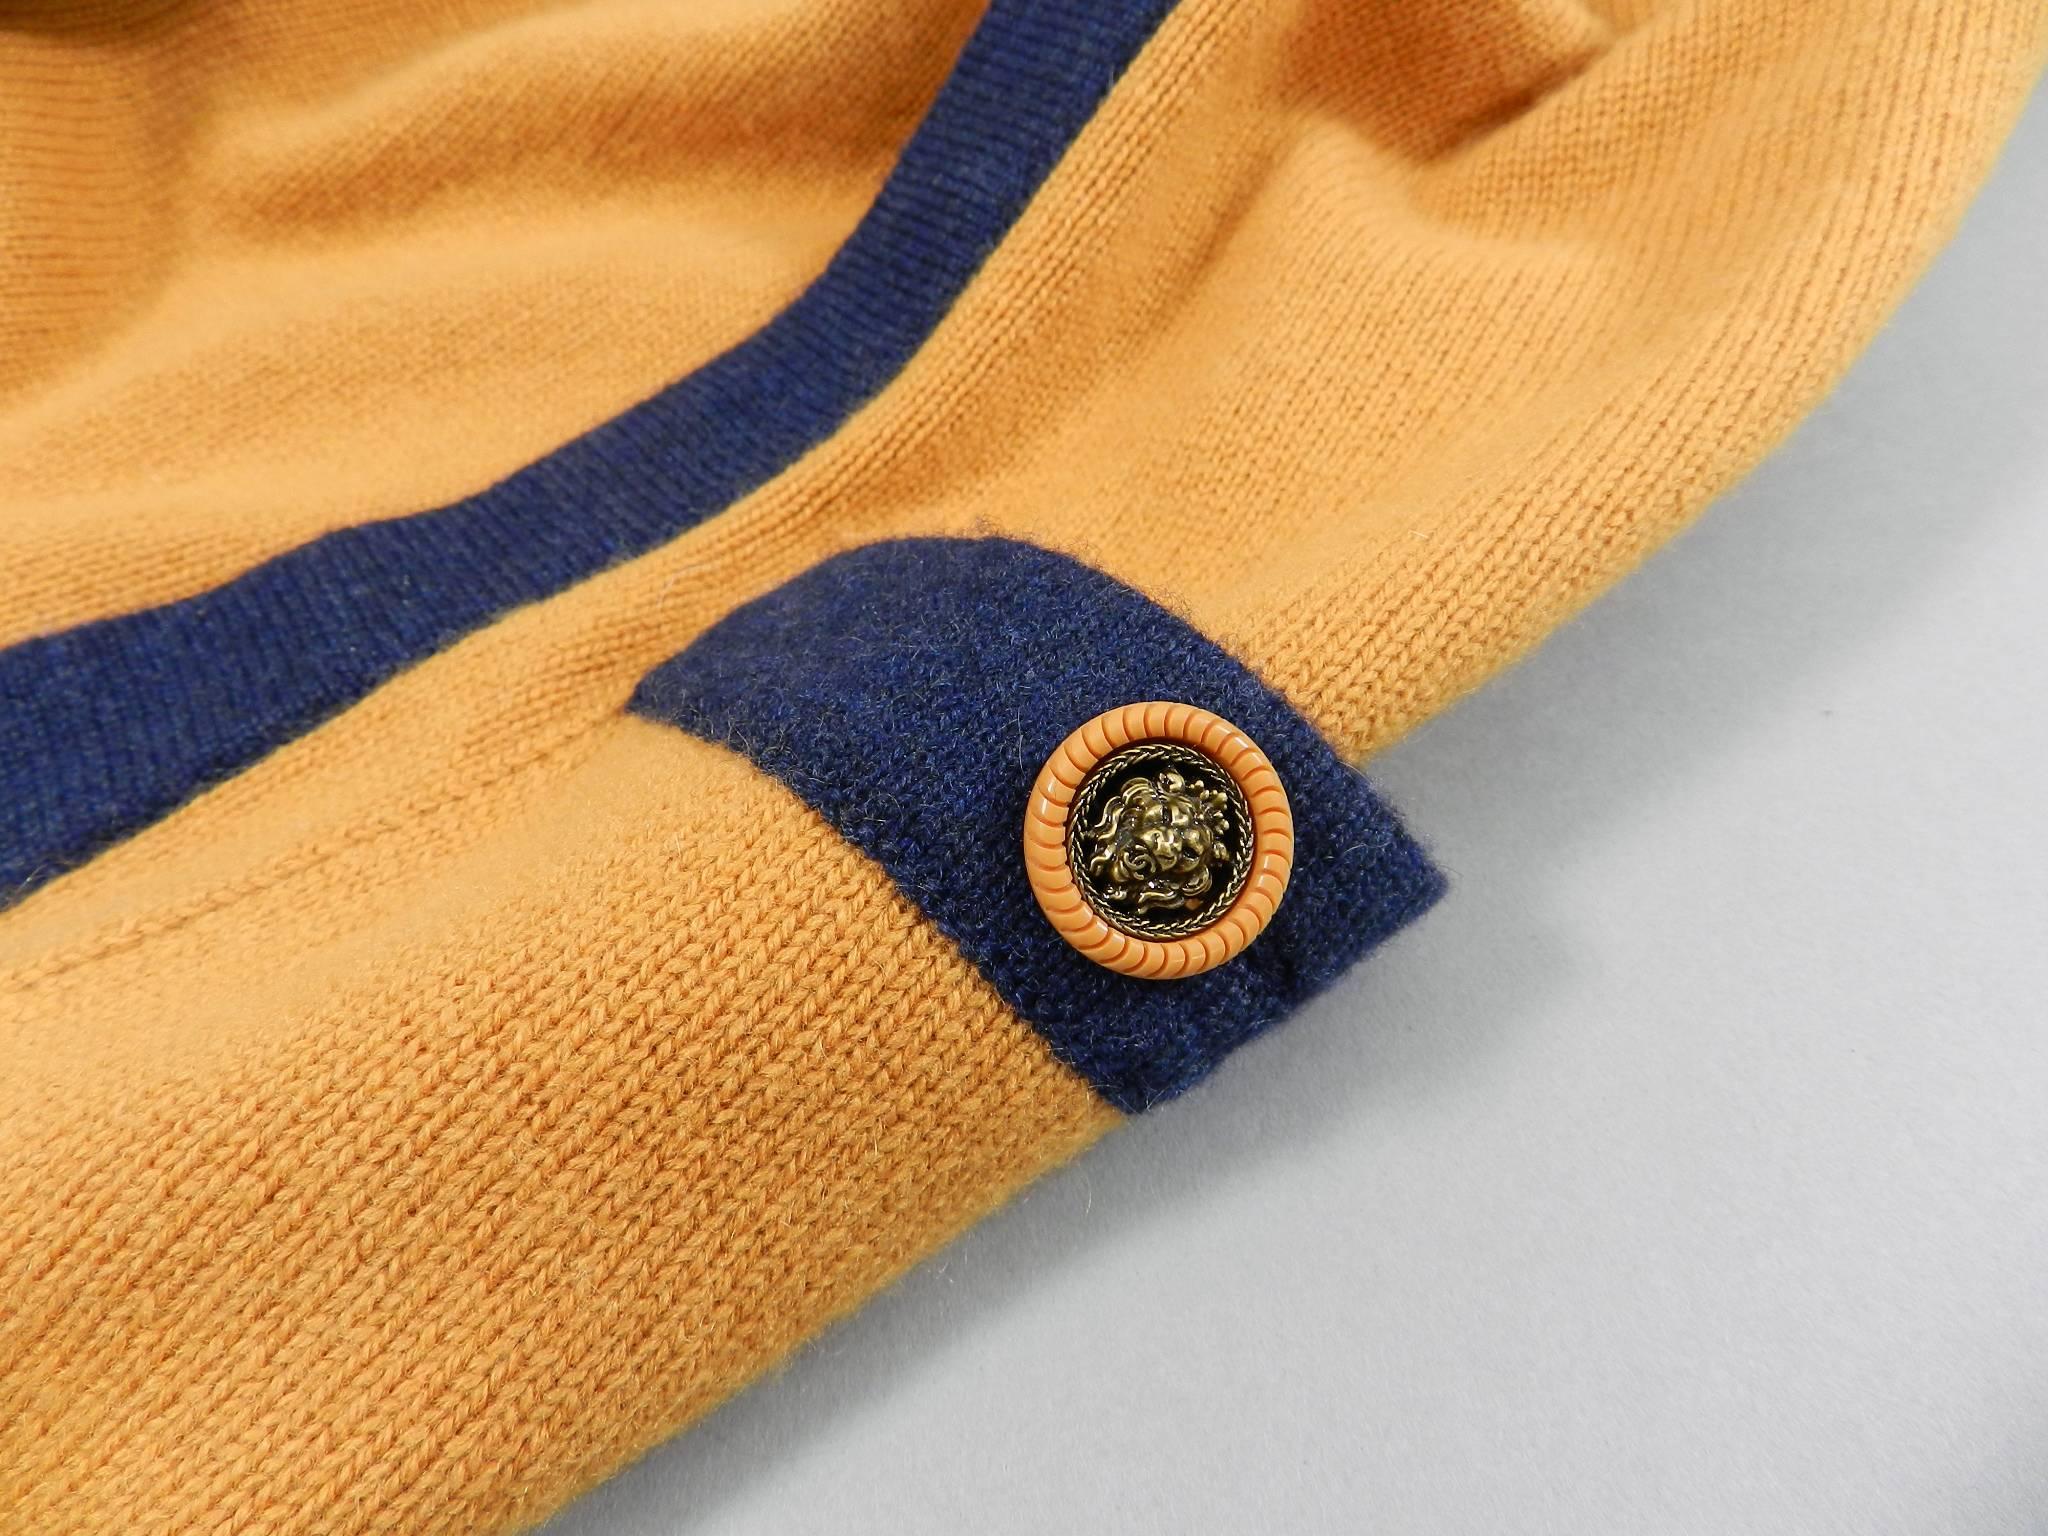 Chanel mustard and navy V-neck Cashmere sweater.  Lion head buttons.  Tagged size FR 38 (usa 6) but fits oversized and can fit larger. Garment bust measures 44" unstretched when laid flat, garment hip is 40" unstretched. Shoulder seams